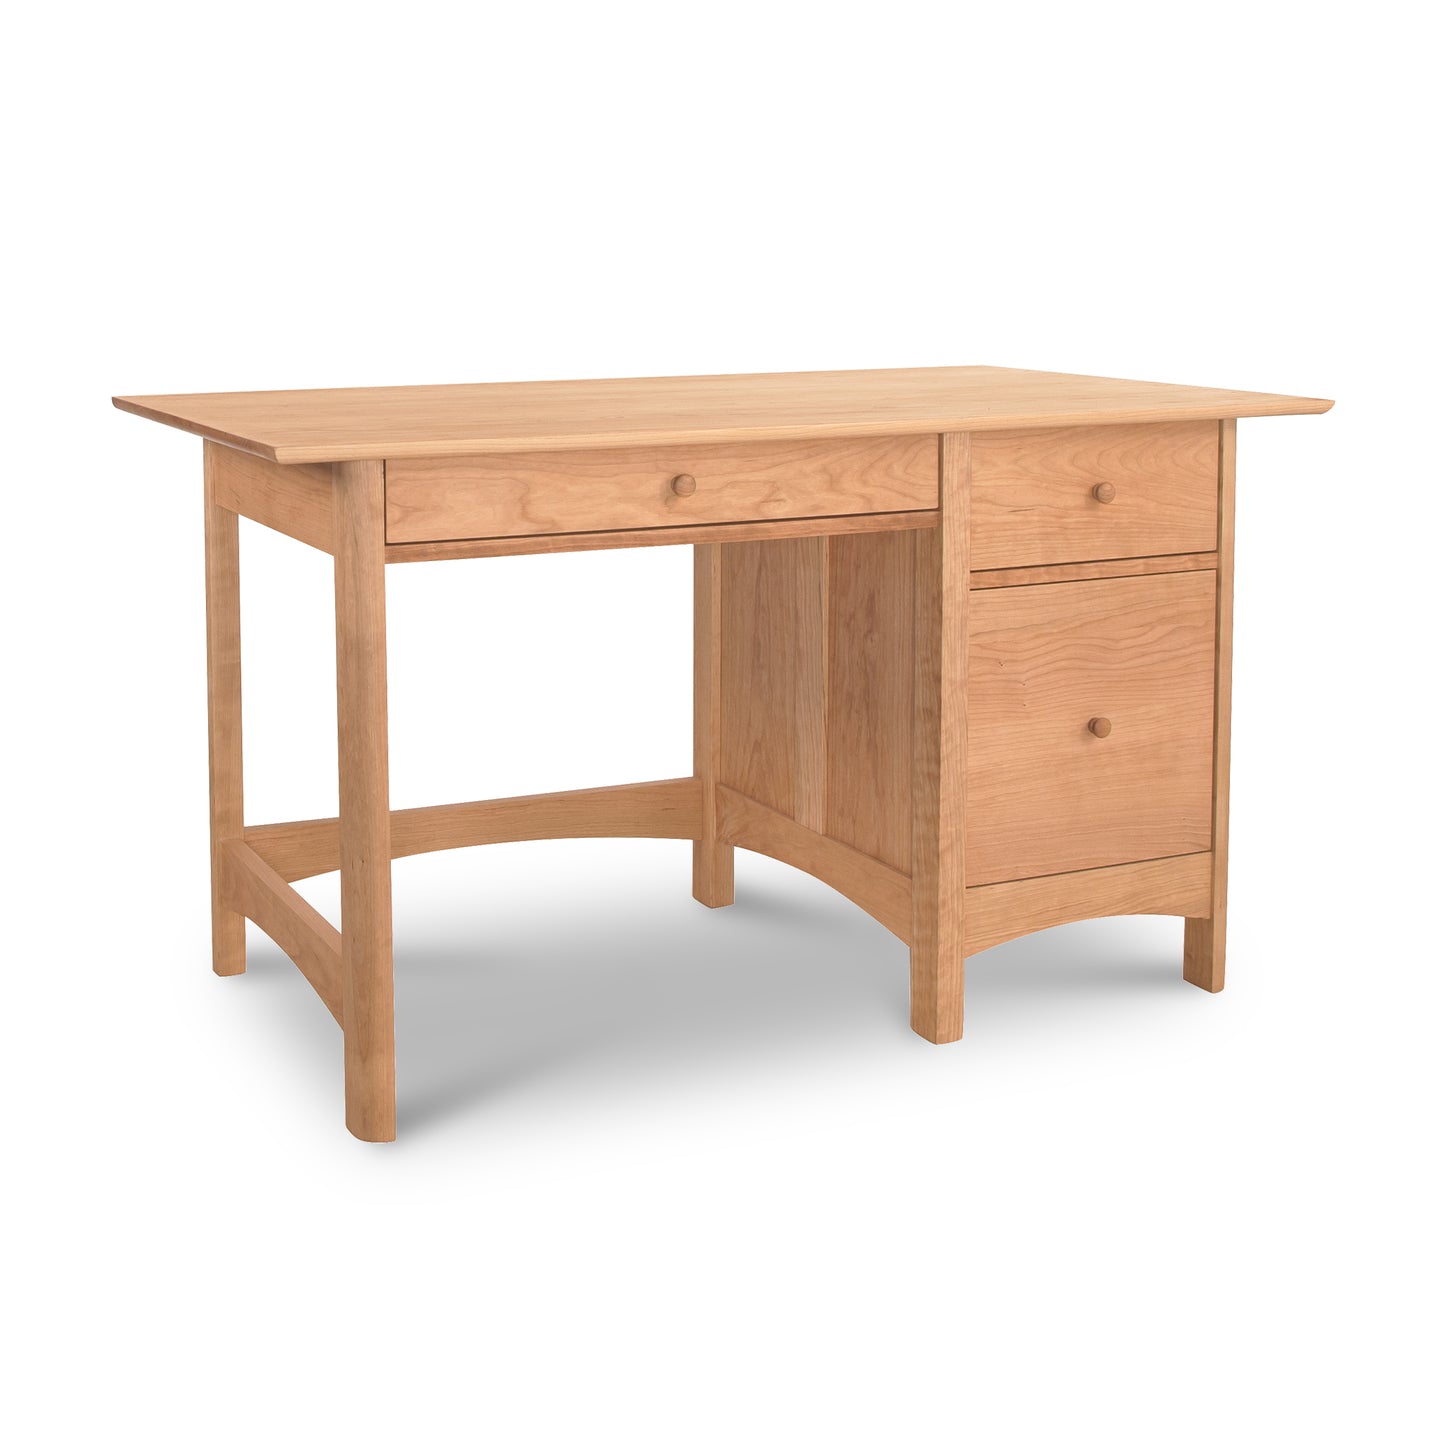 A Heartwood Shaker Study Desk from Vermont Furniture Designs with a single drawer and a cabinet, isolated on a white background.